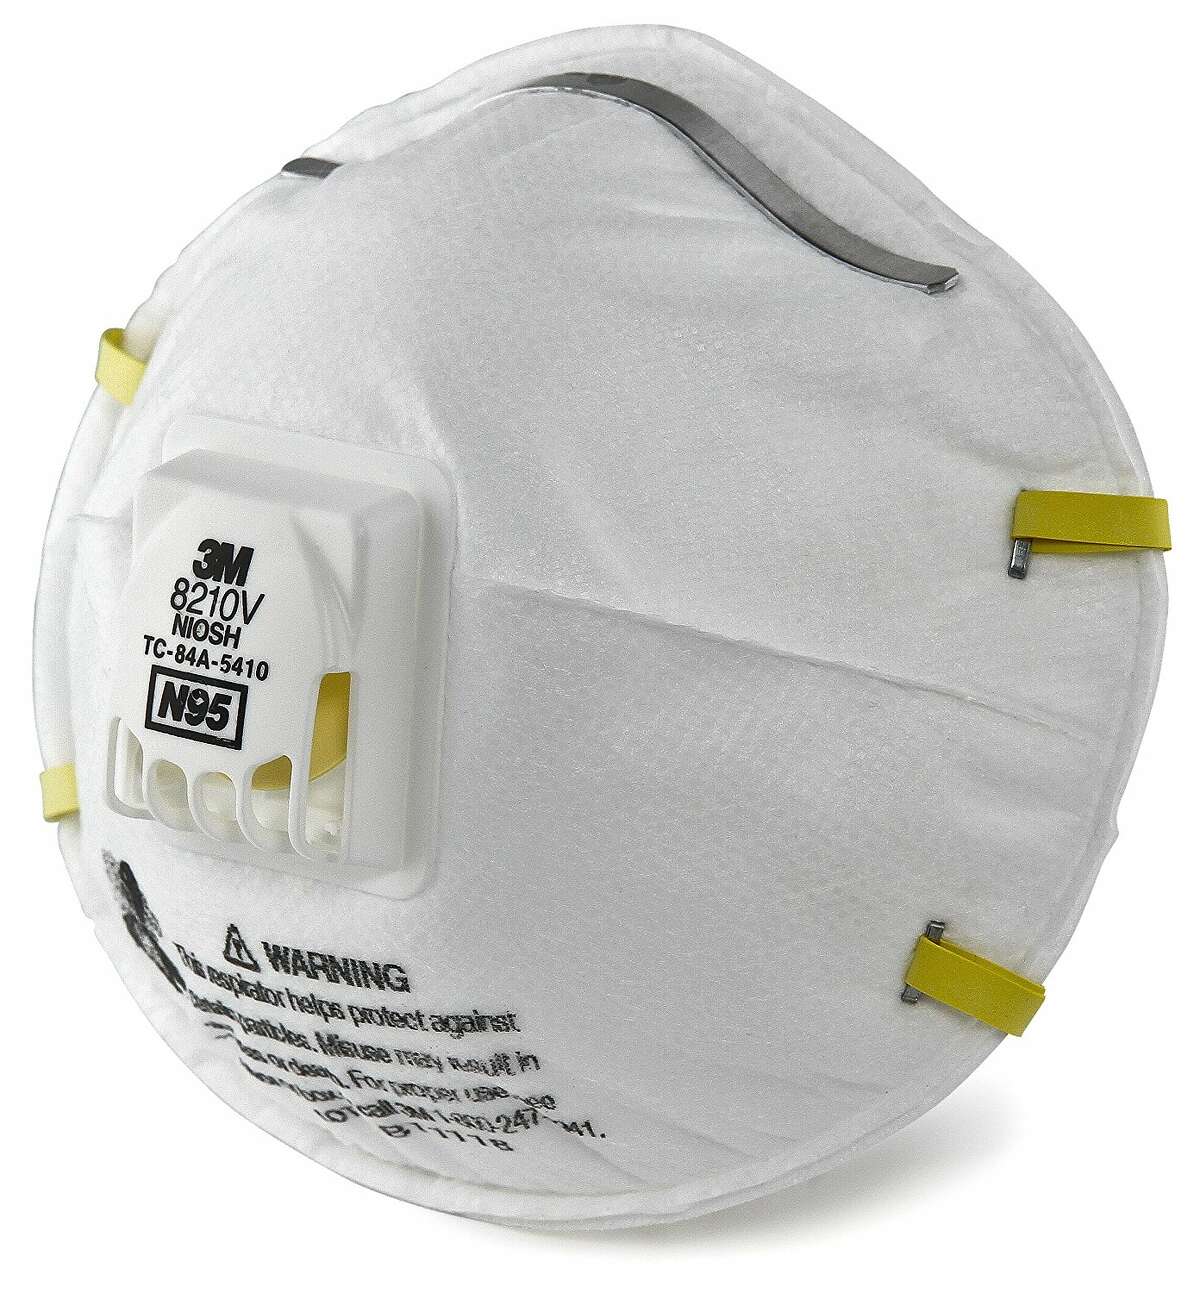 A particulate respirator like this one from 3M offered on Amazon is recommended for filtering wildfire smoke.